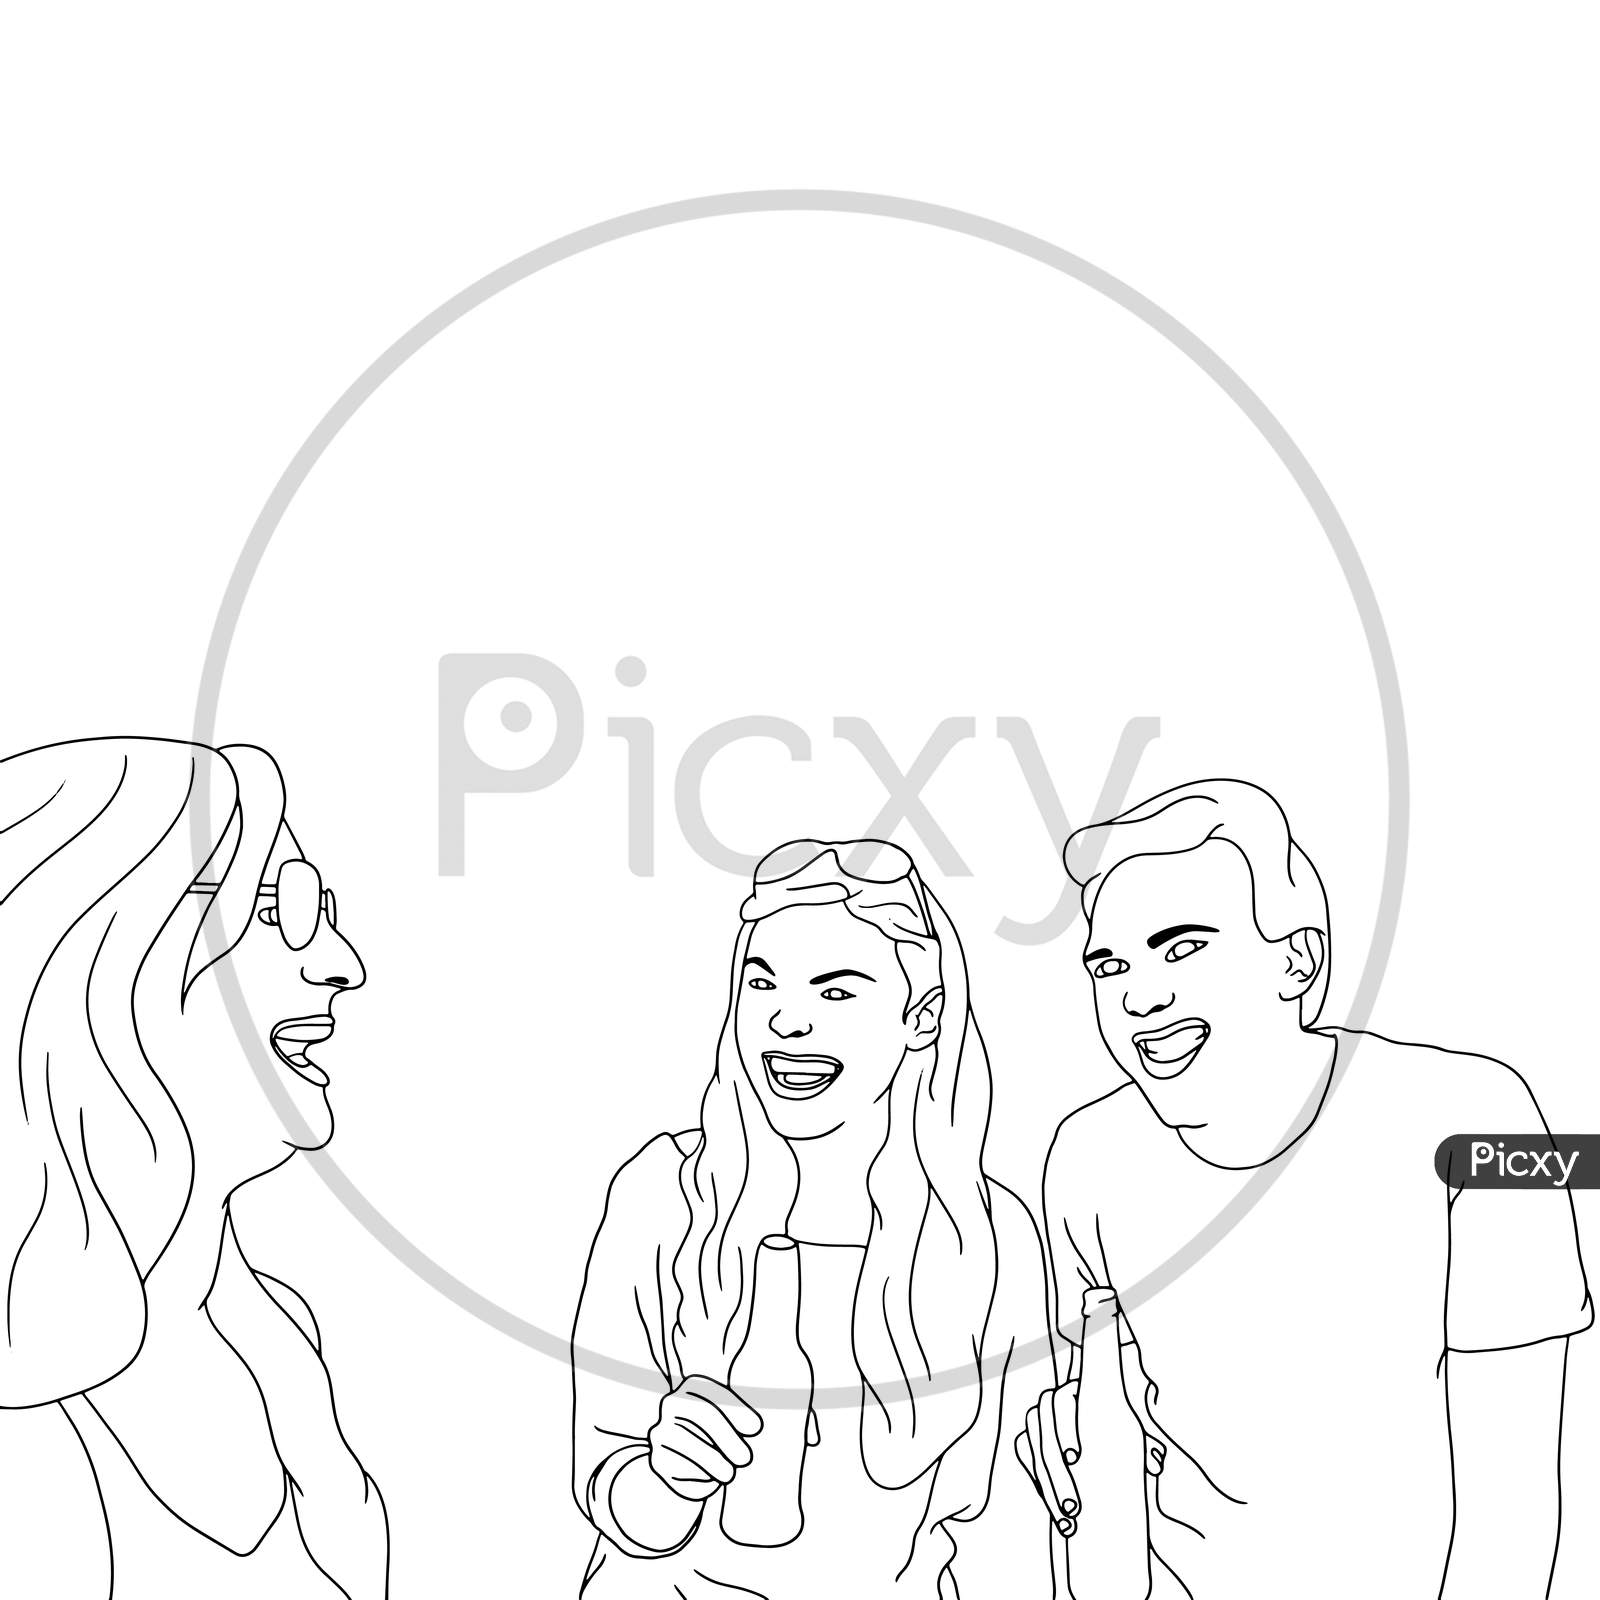 Coloring Pages - A Group Of Friends Having Outdoor Fun, Friends Time, Flat Colorful Illustration Of People For Friendship Day. Hand-Drawn Character Illustration Of Happy People.